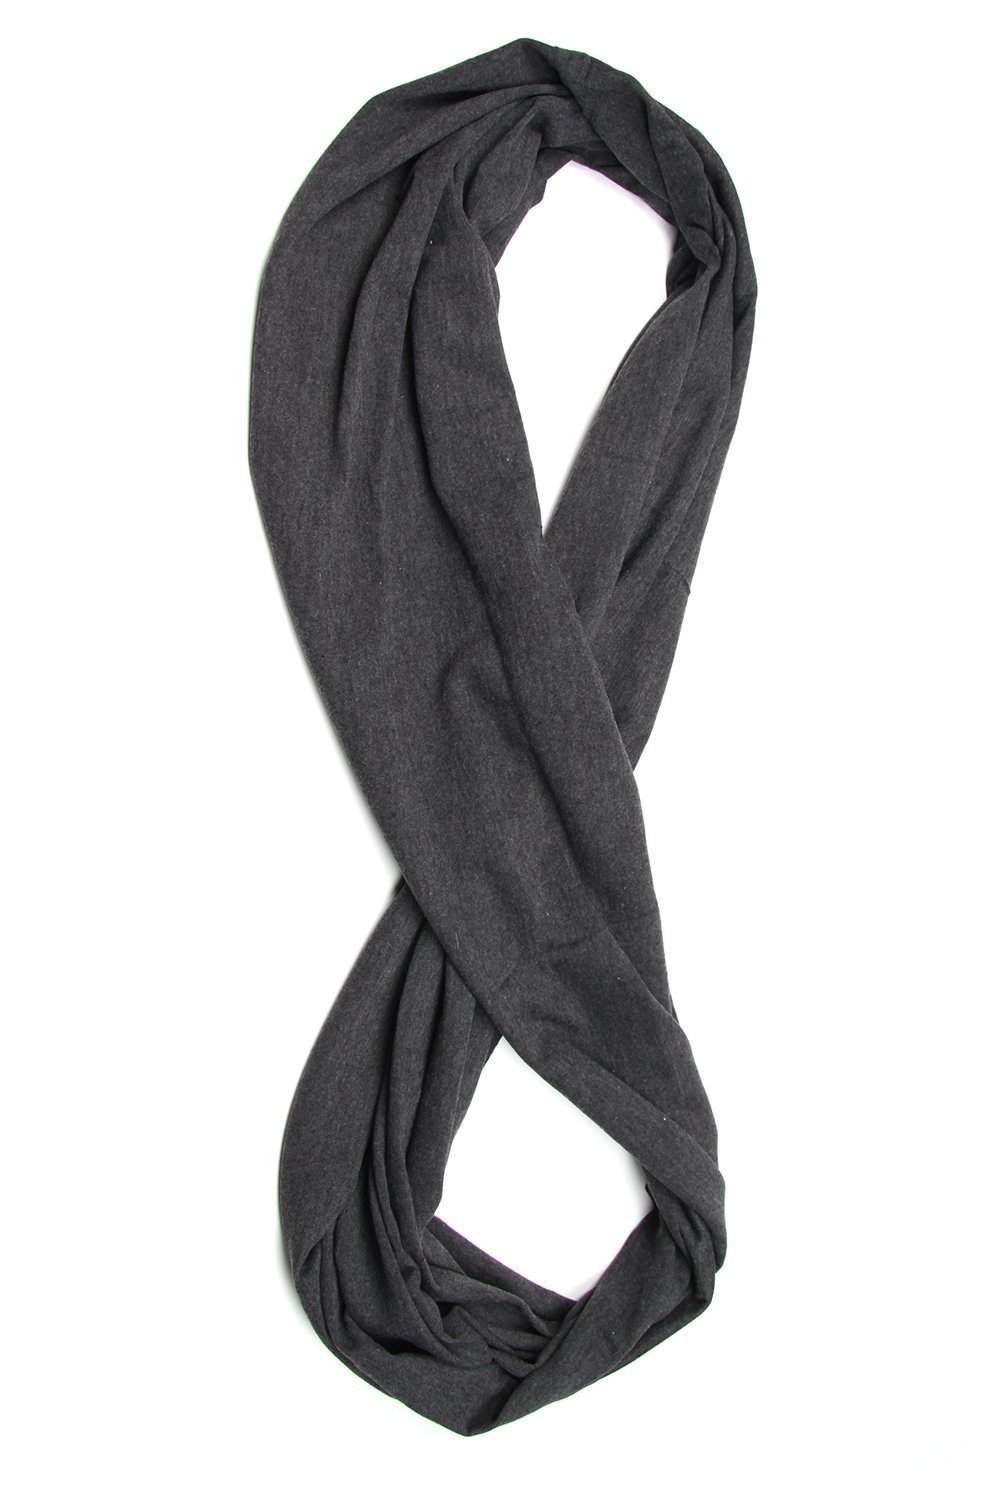 Charcoal Gray Circle Scarf-scarves-Necklush